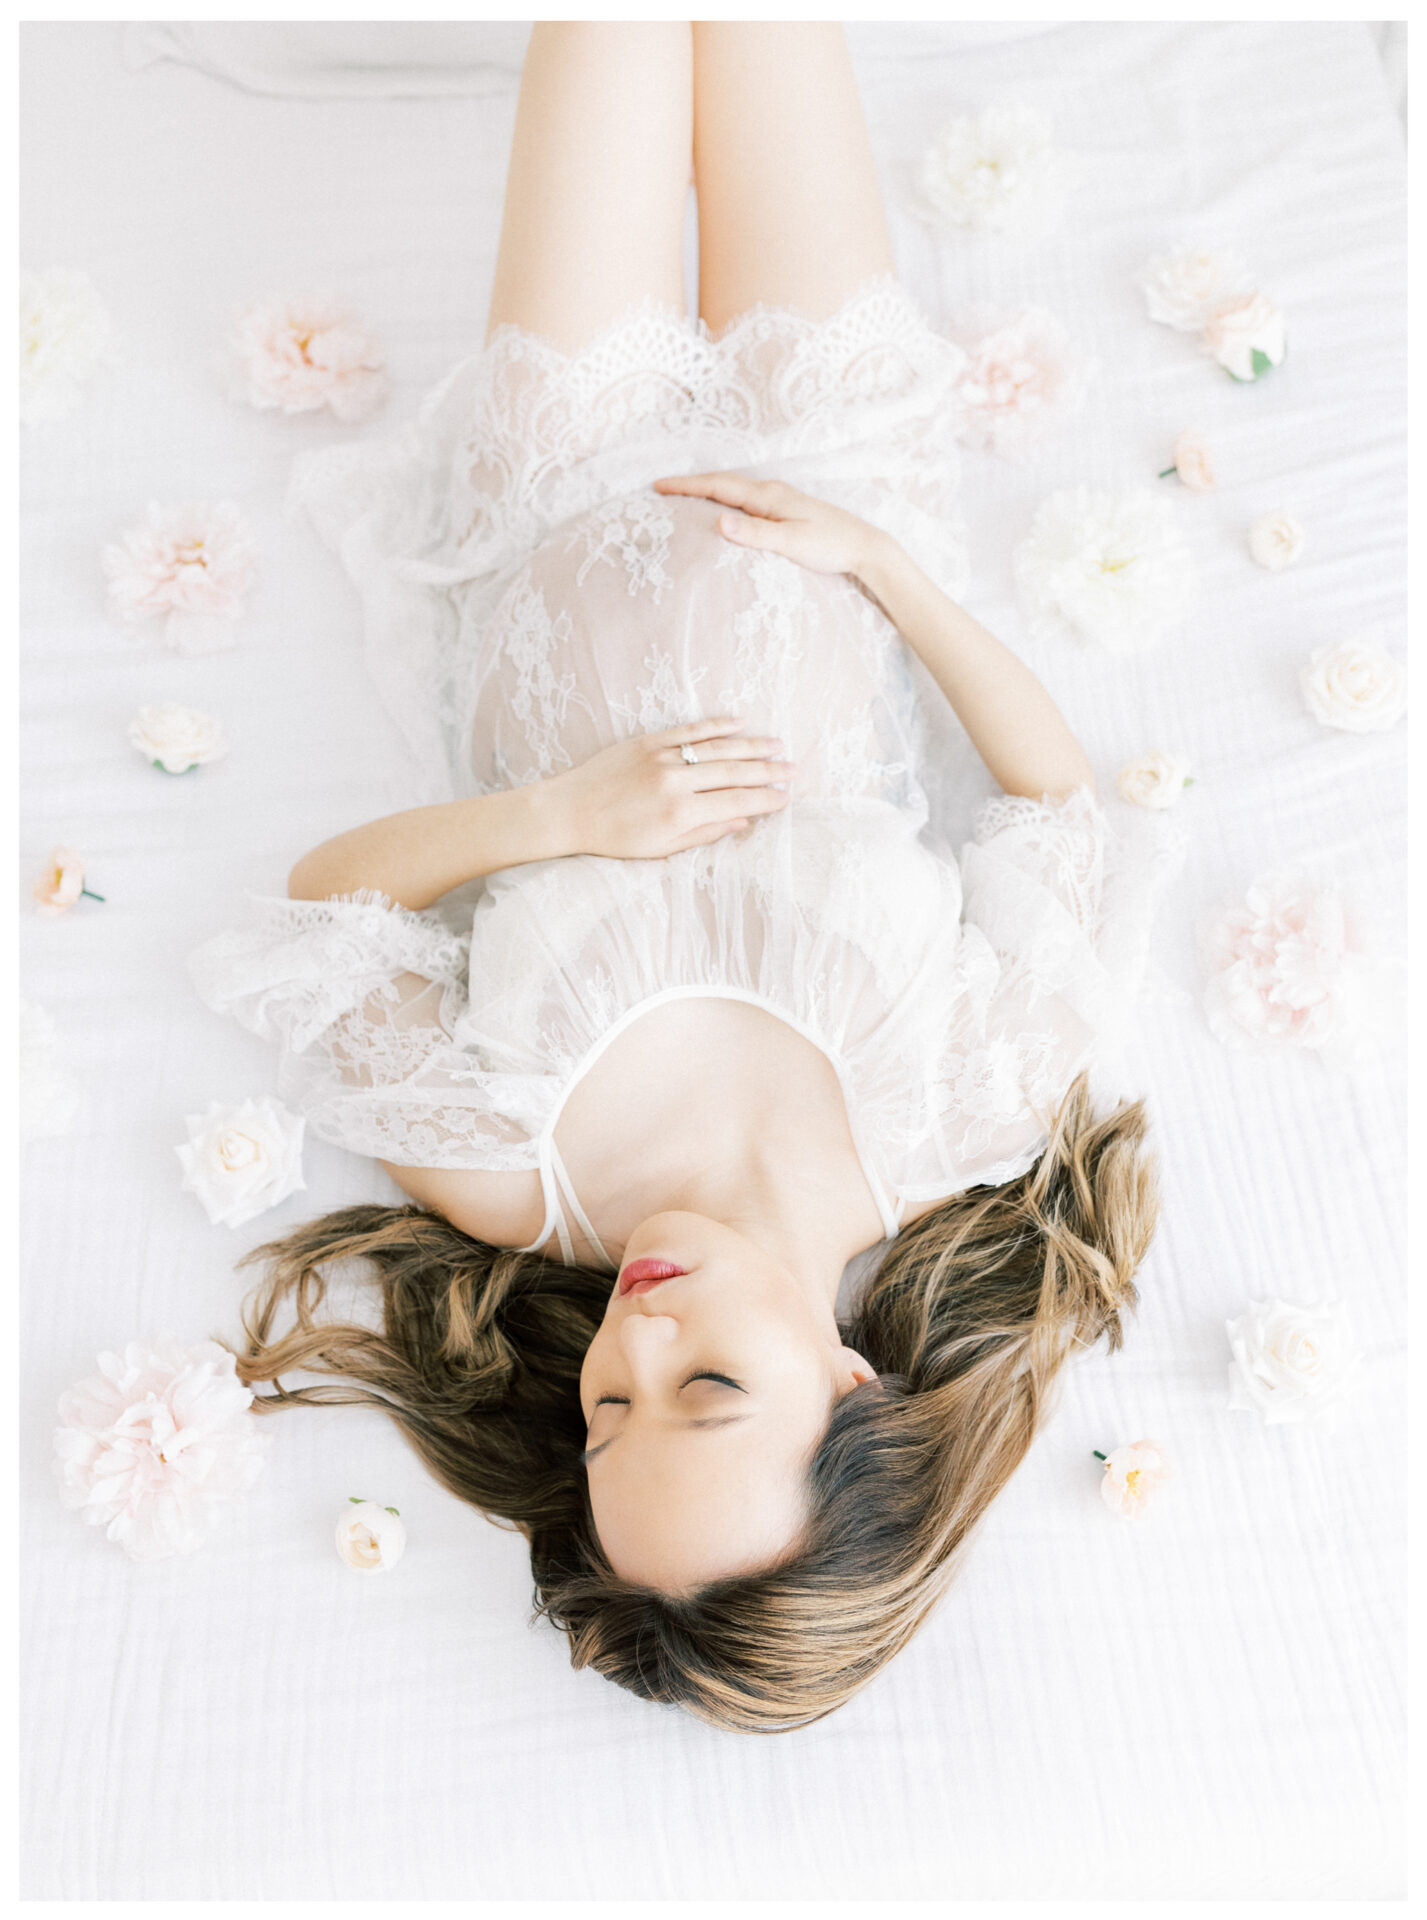 Winter Freire Photography | Fine Art Maternity Boudoir | Expecting mother wearing a sheer lace dress and laying on a beautiful white bed with flowers